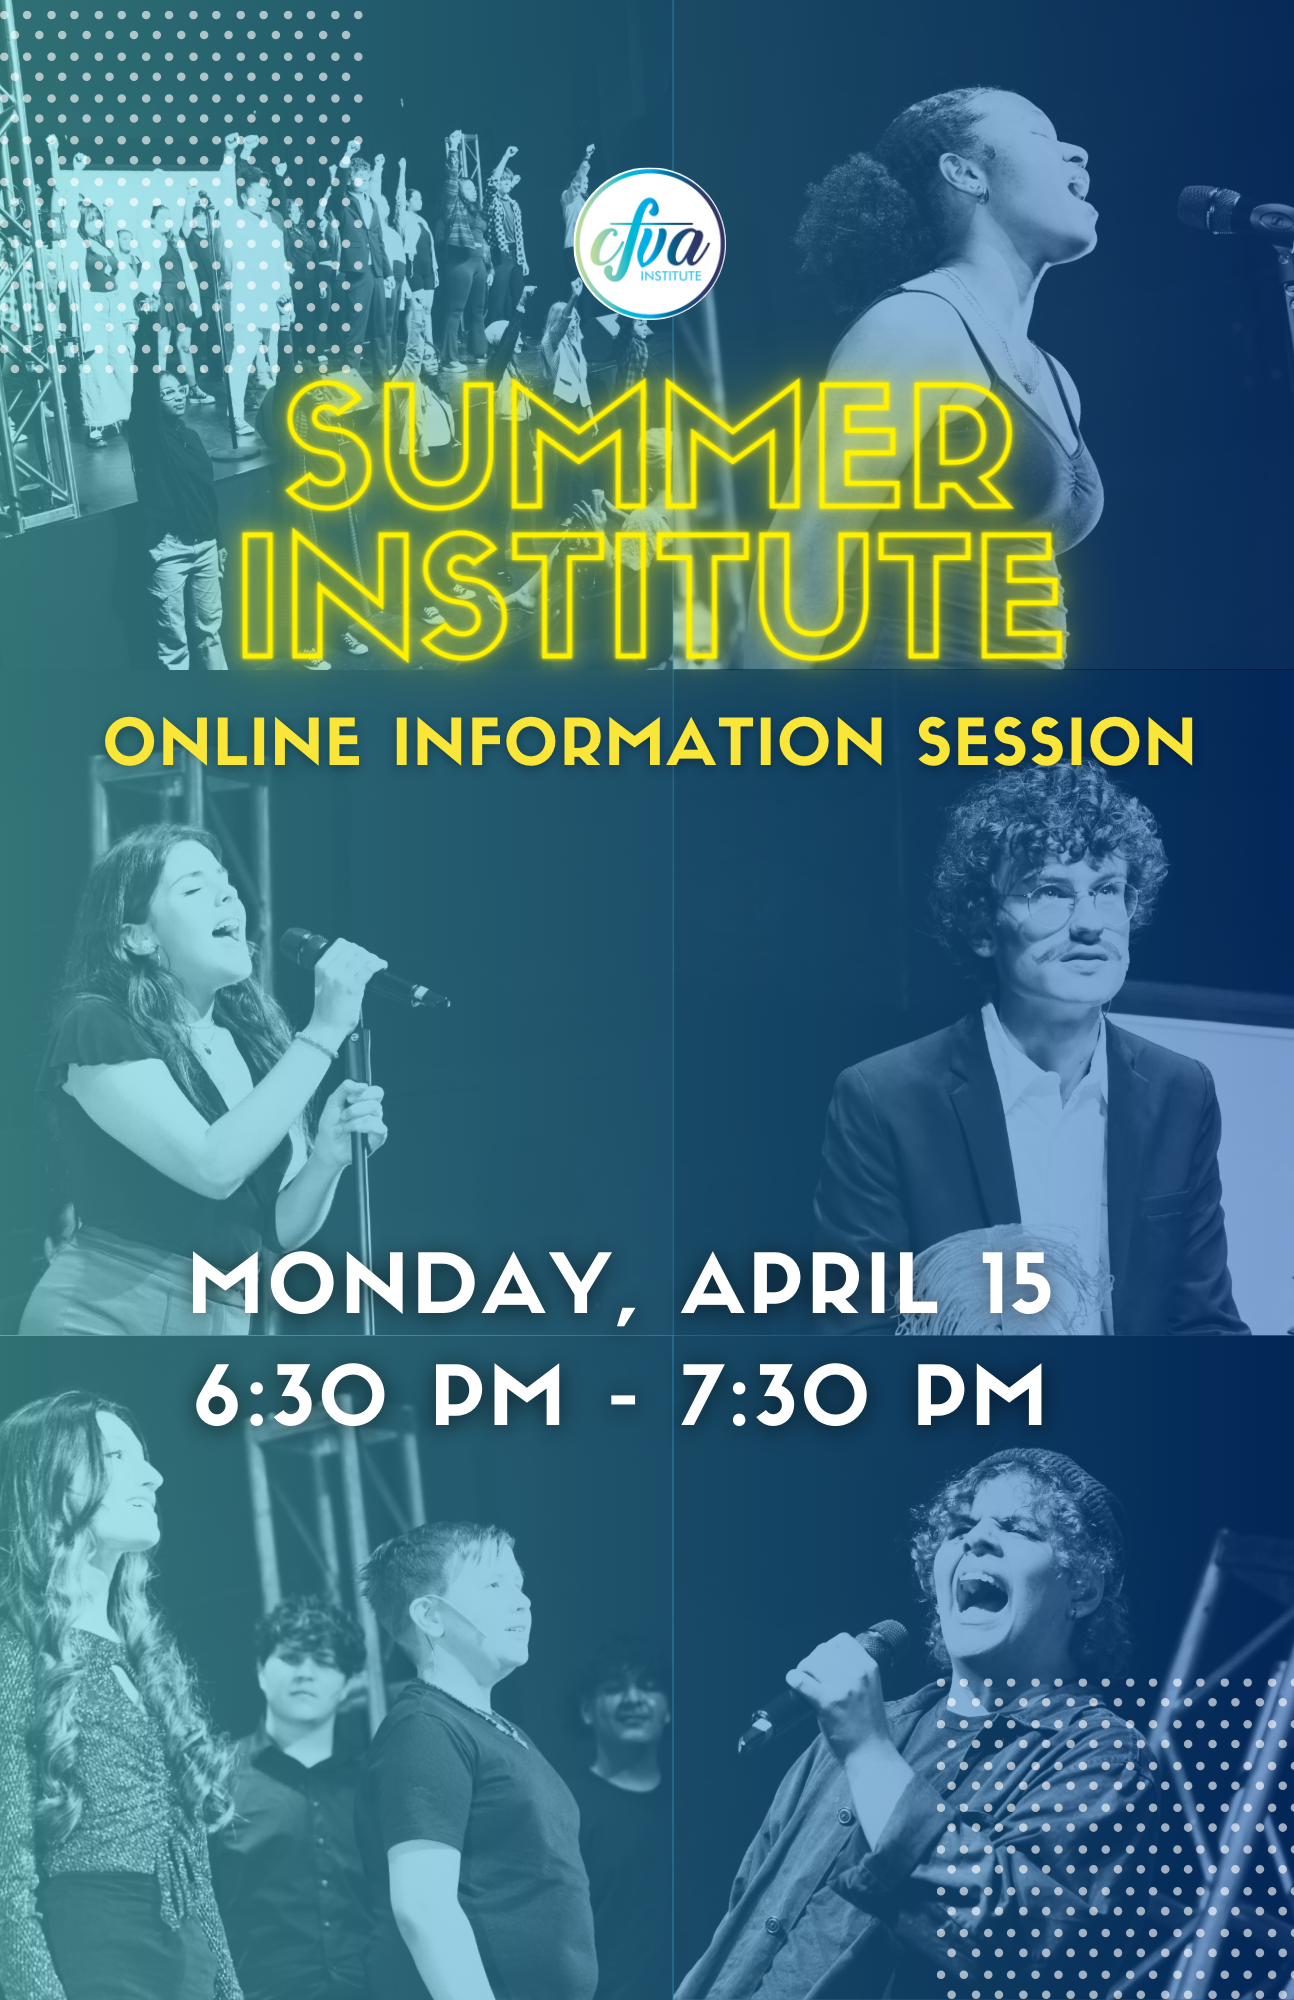 Summer Institute Online Information Session Poster Image. Monday, April 15 6:30 pm - 7:30 pm